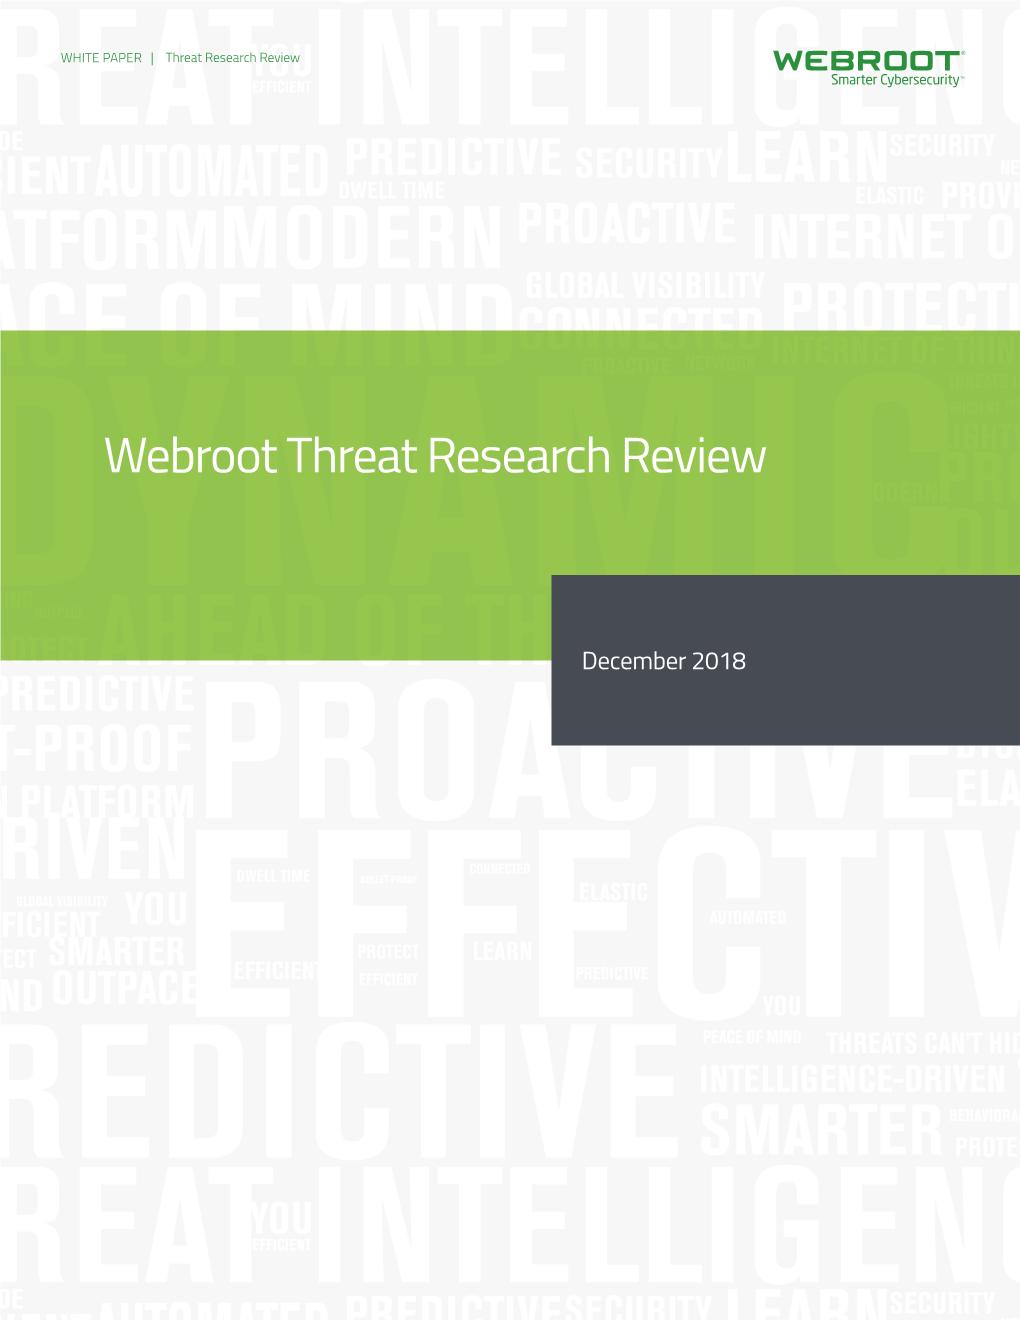 Webroot Threat Research Review